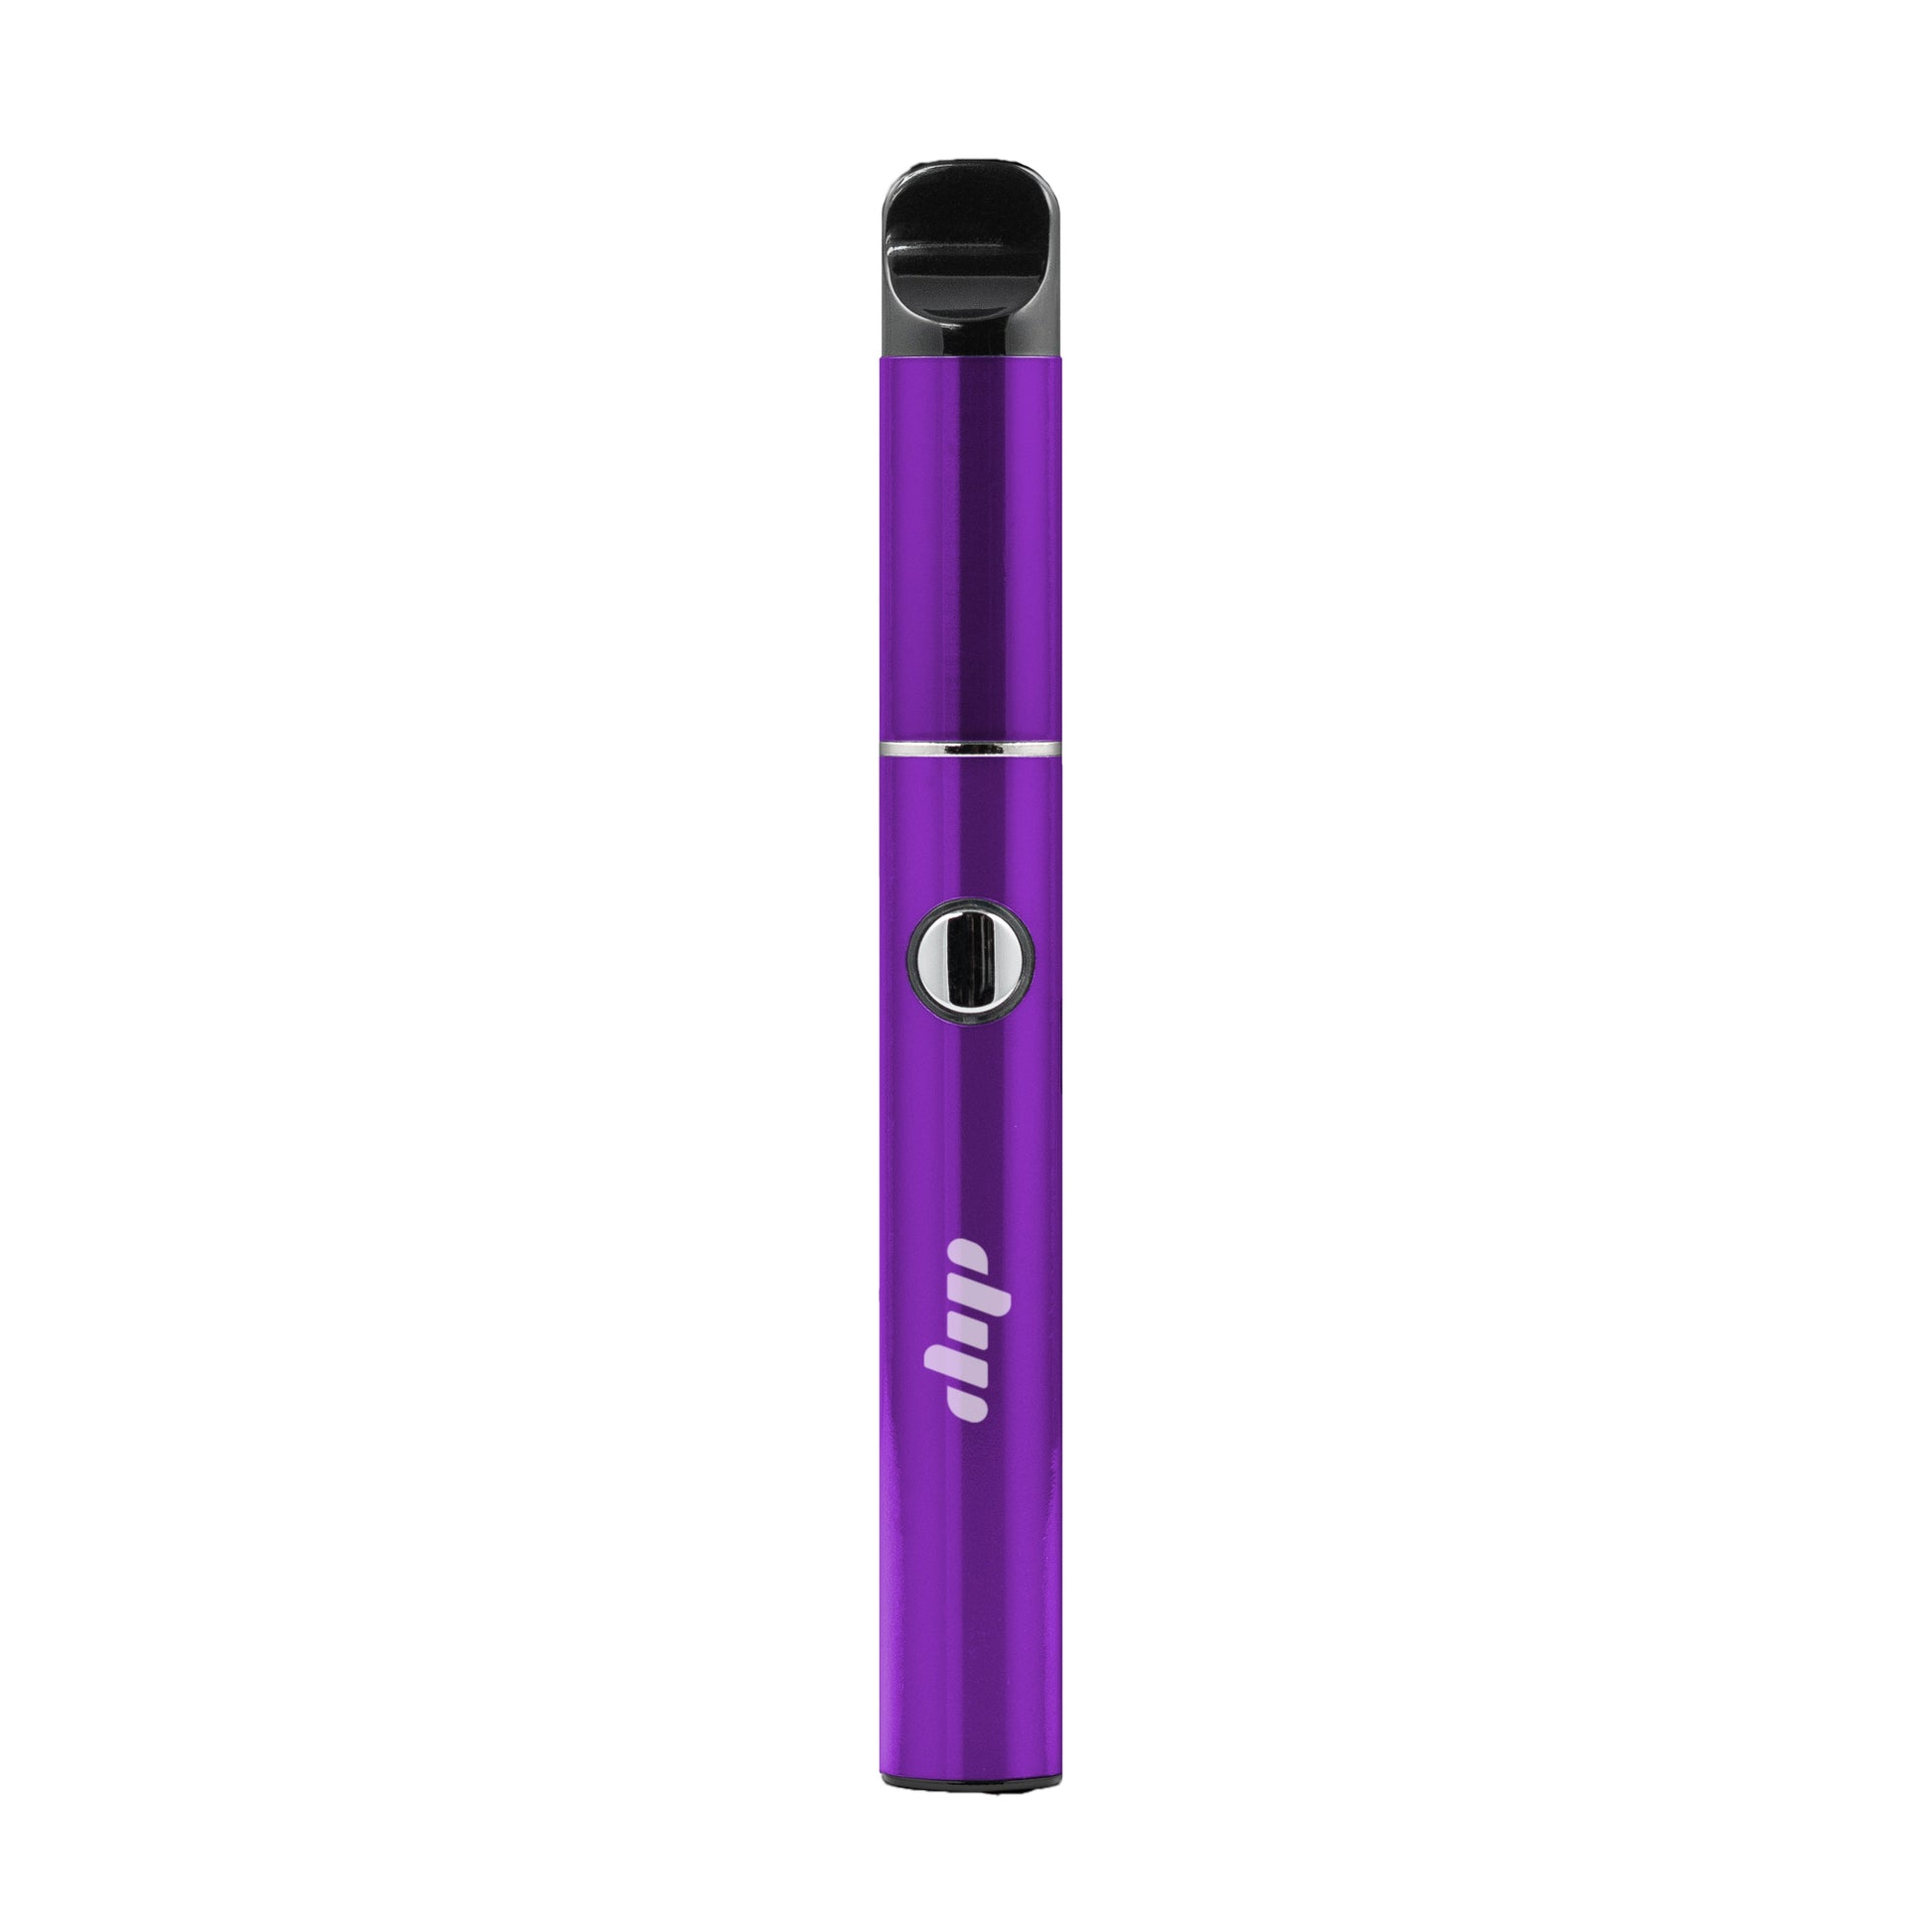 Purple portable dabbing device, the Lunar, by Dip Devices.